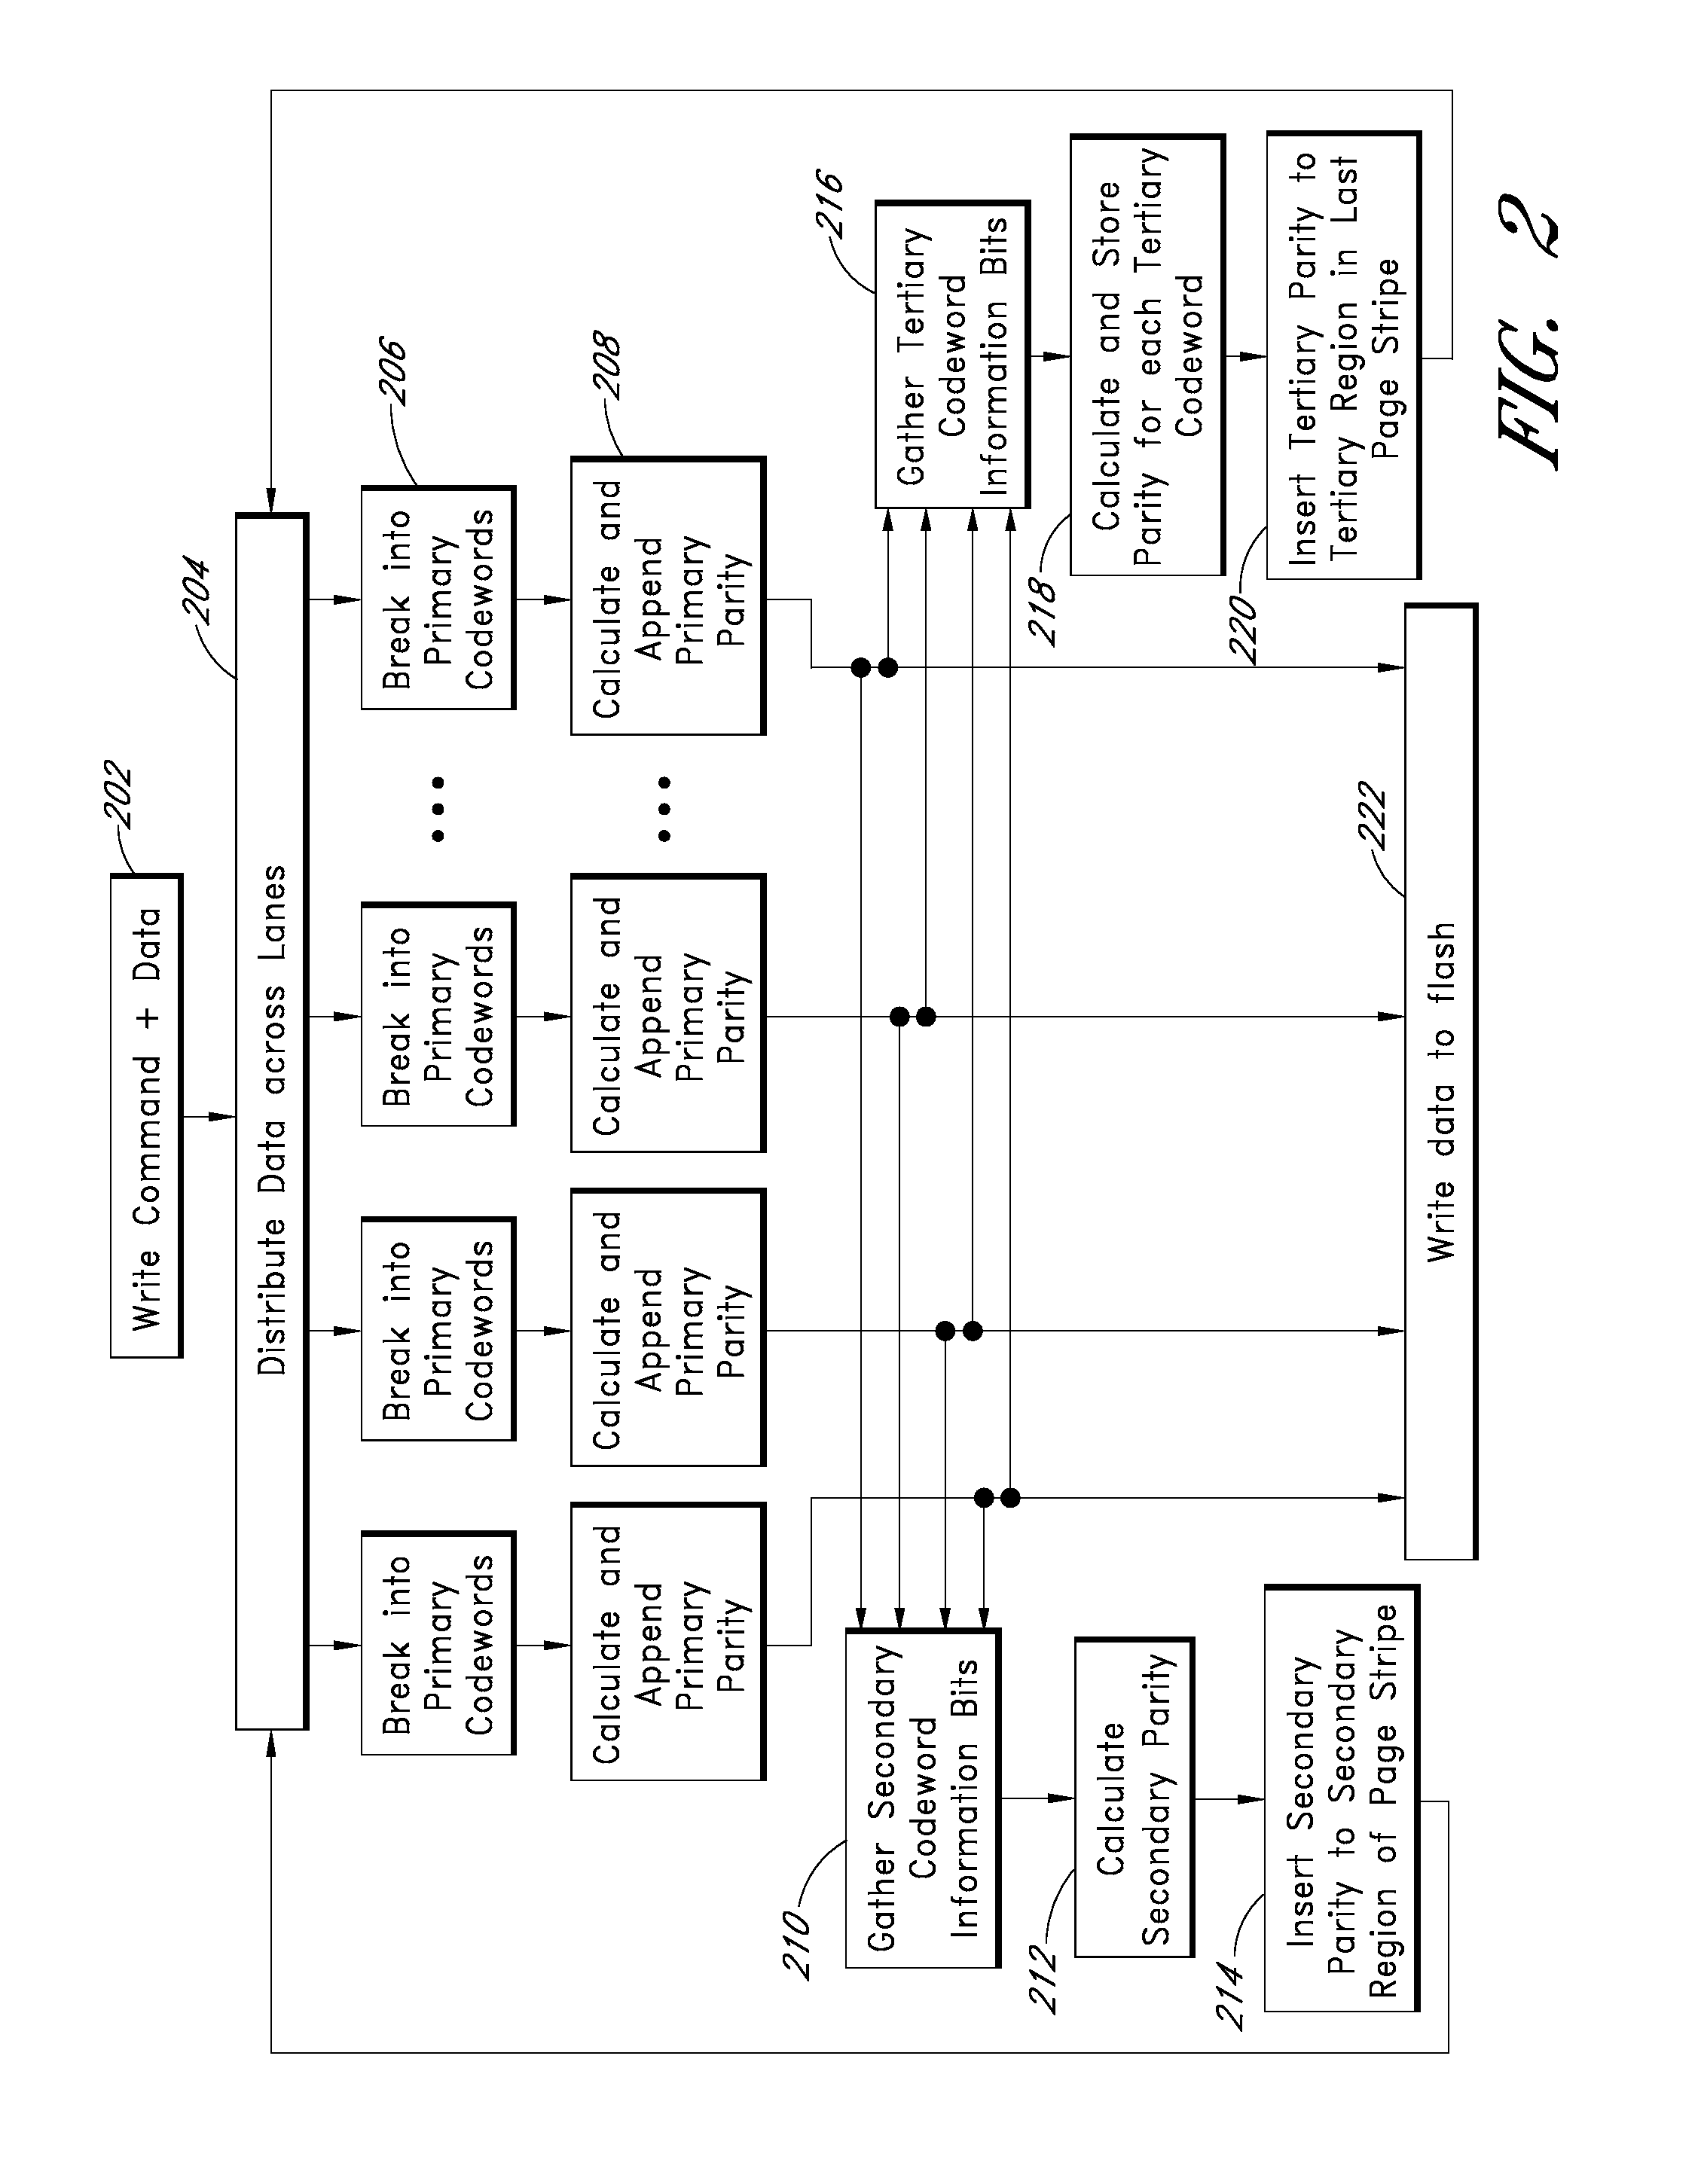 Systems and methods for initializing regions of a flash drive having diverse error correction coding (ECC) schemes